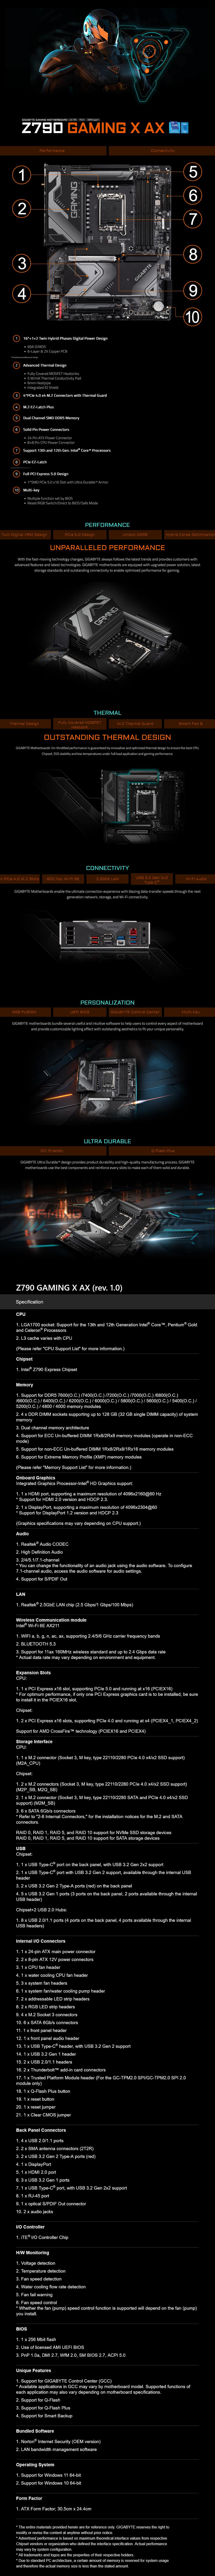 A large marketing image providing additional information about the product Gigabyte Z790 Gaming X AX LGA1700 ATX Desktop Motherboard - Additional alt info not provided